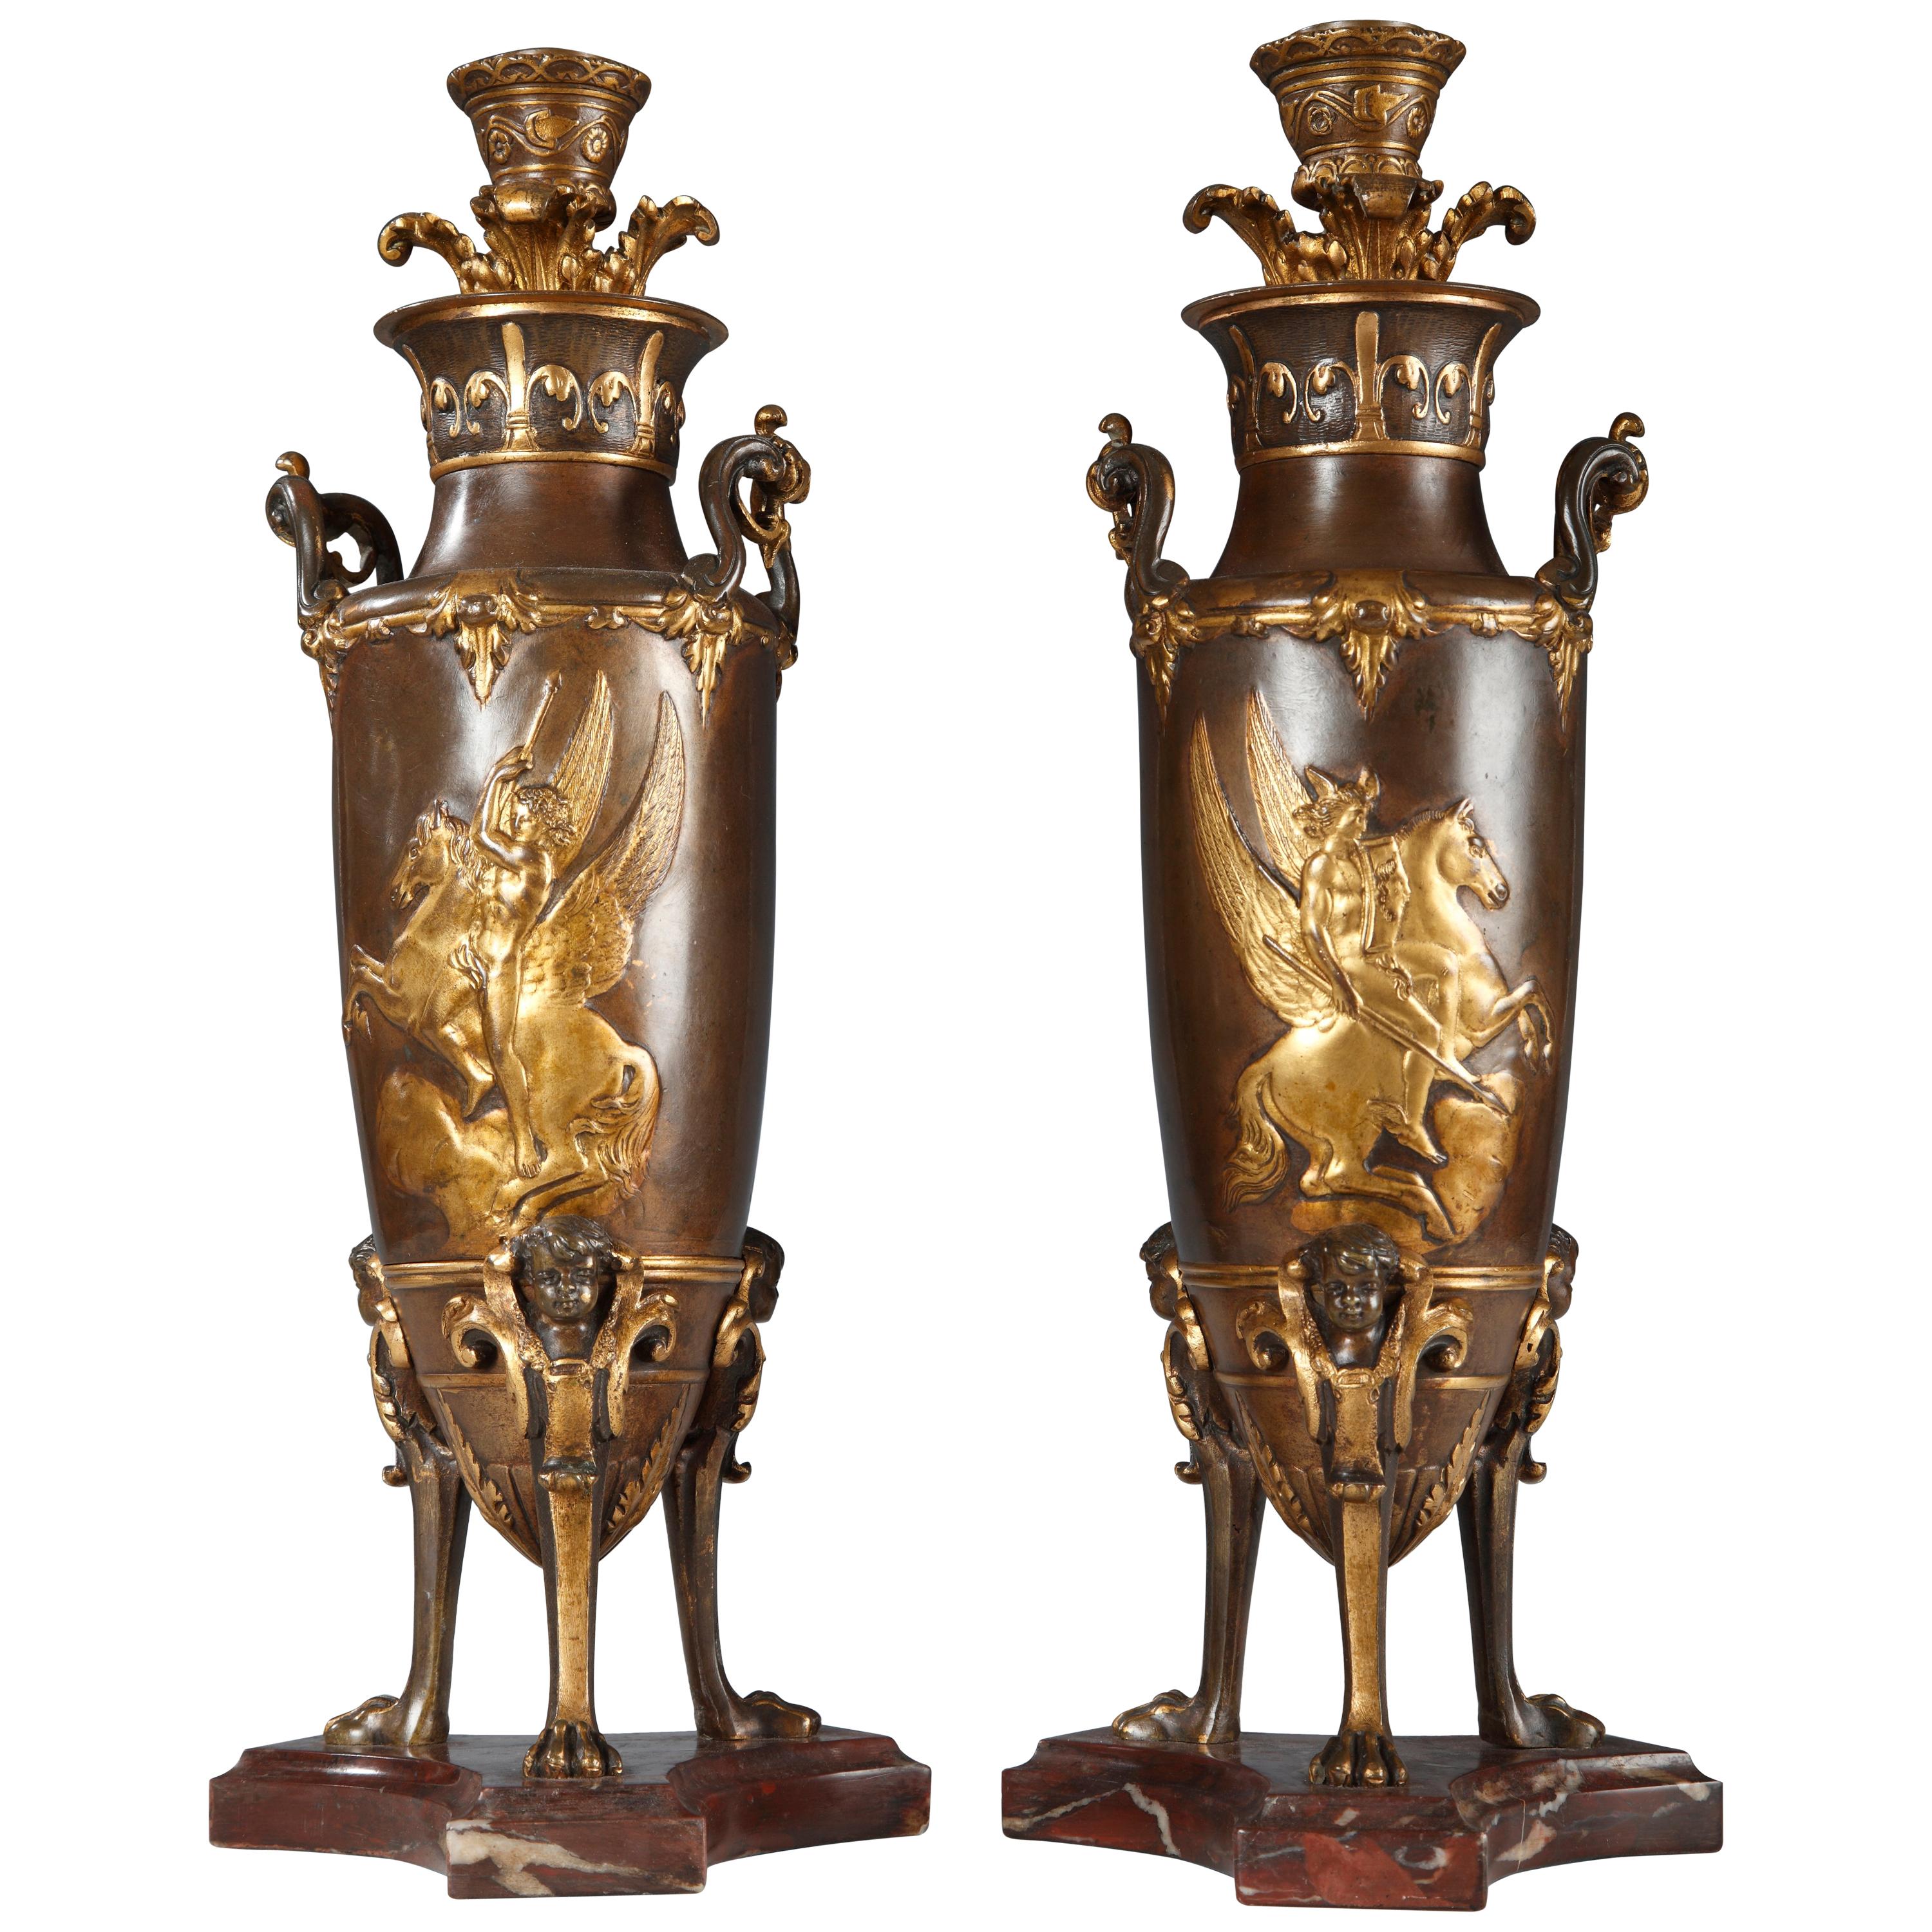 Pair of Neo-Greek Vase-Candlesticks Attr. to Barbedienne and Levillain, c. 1880